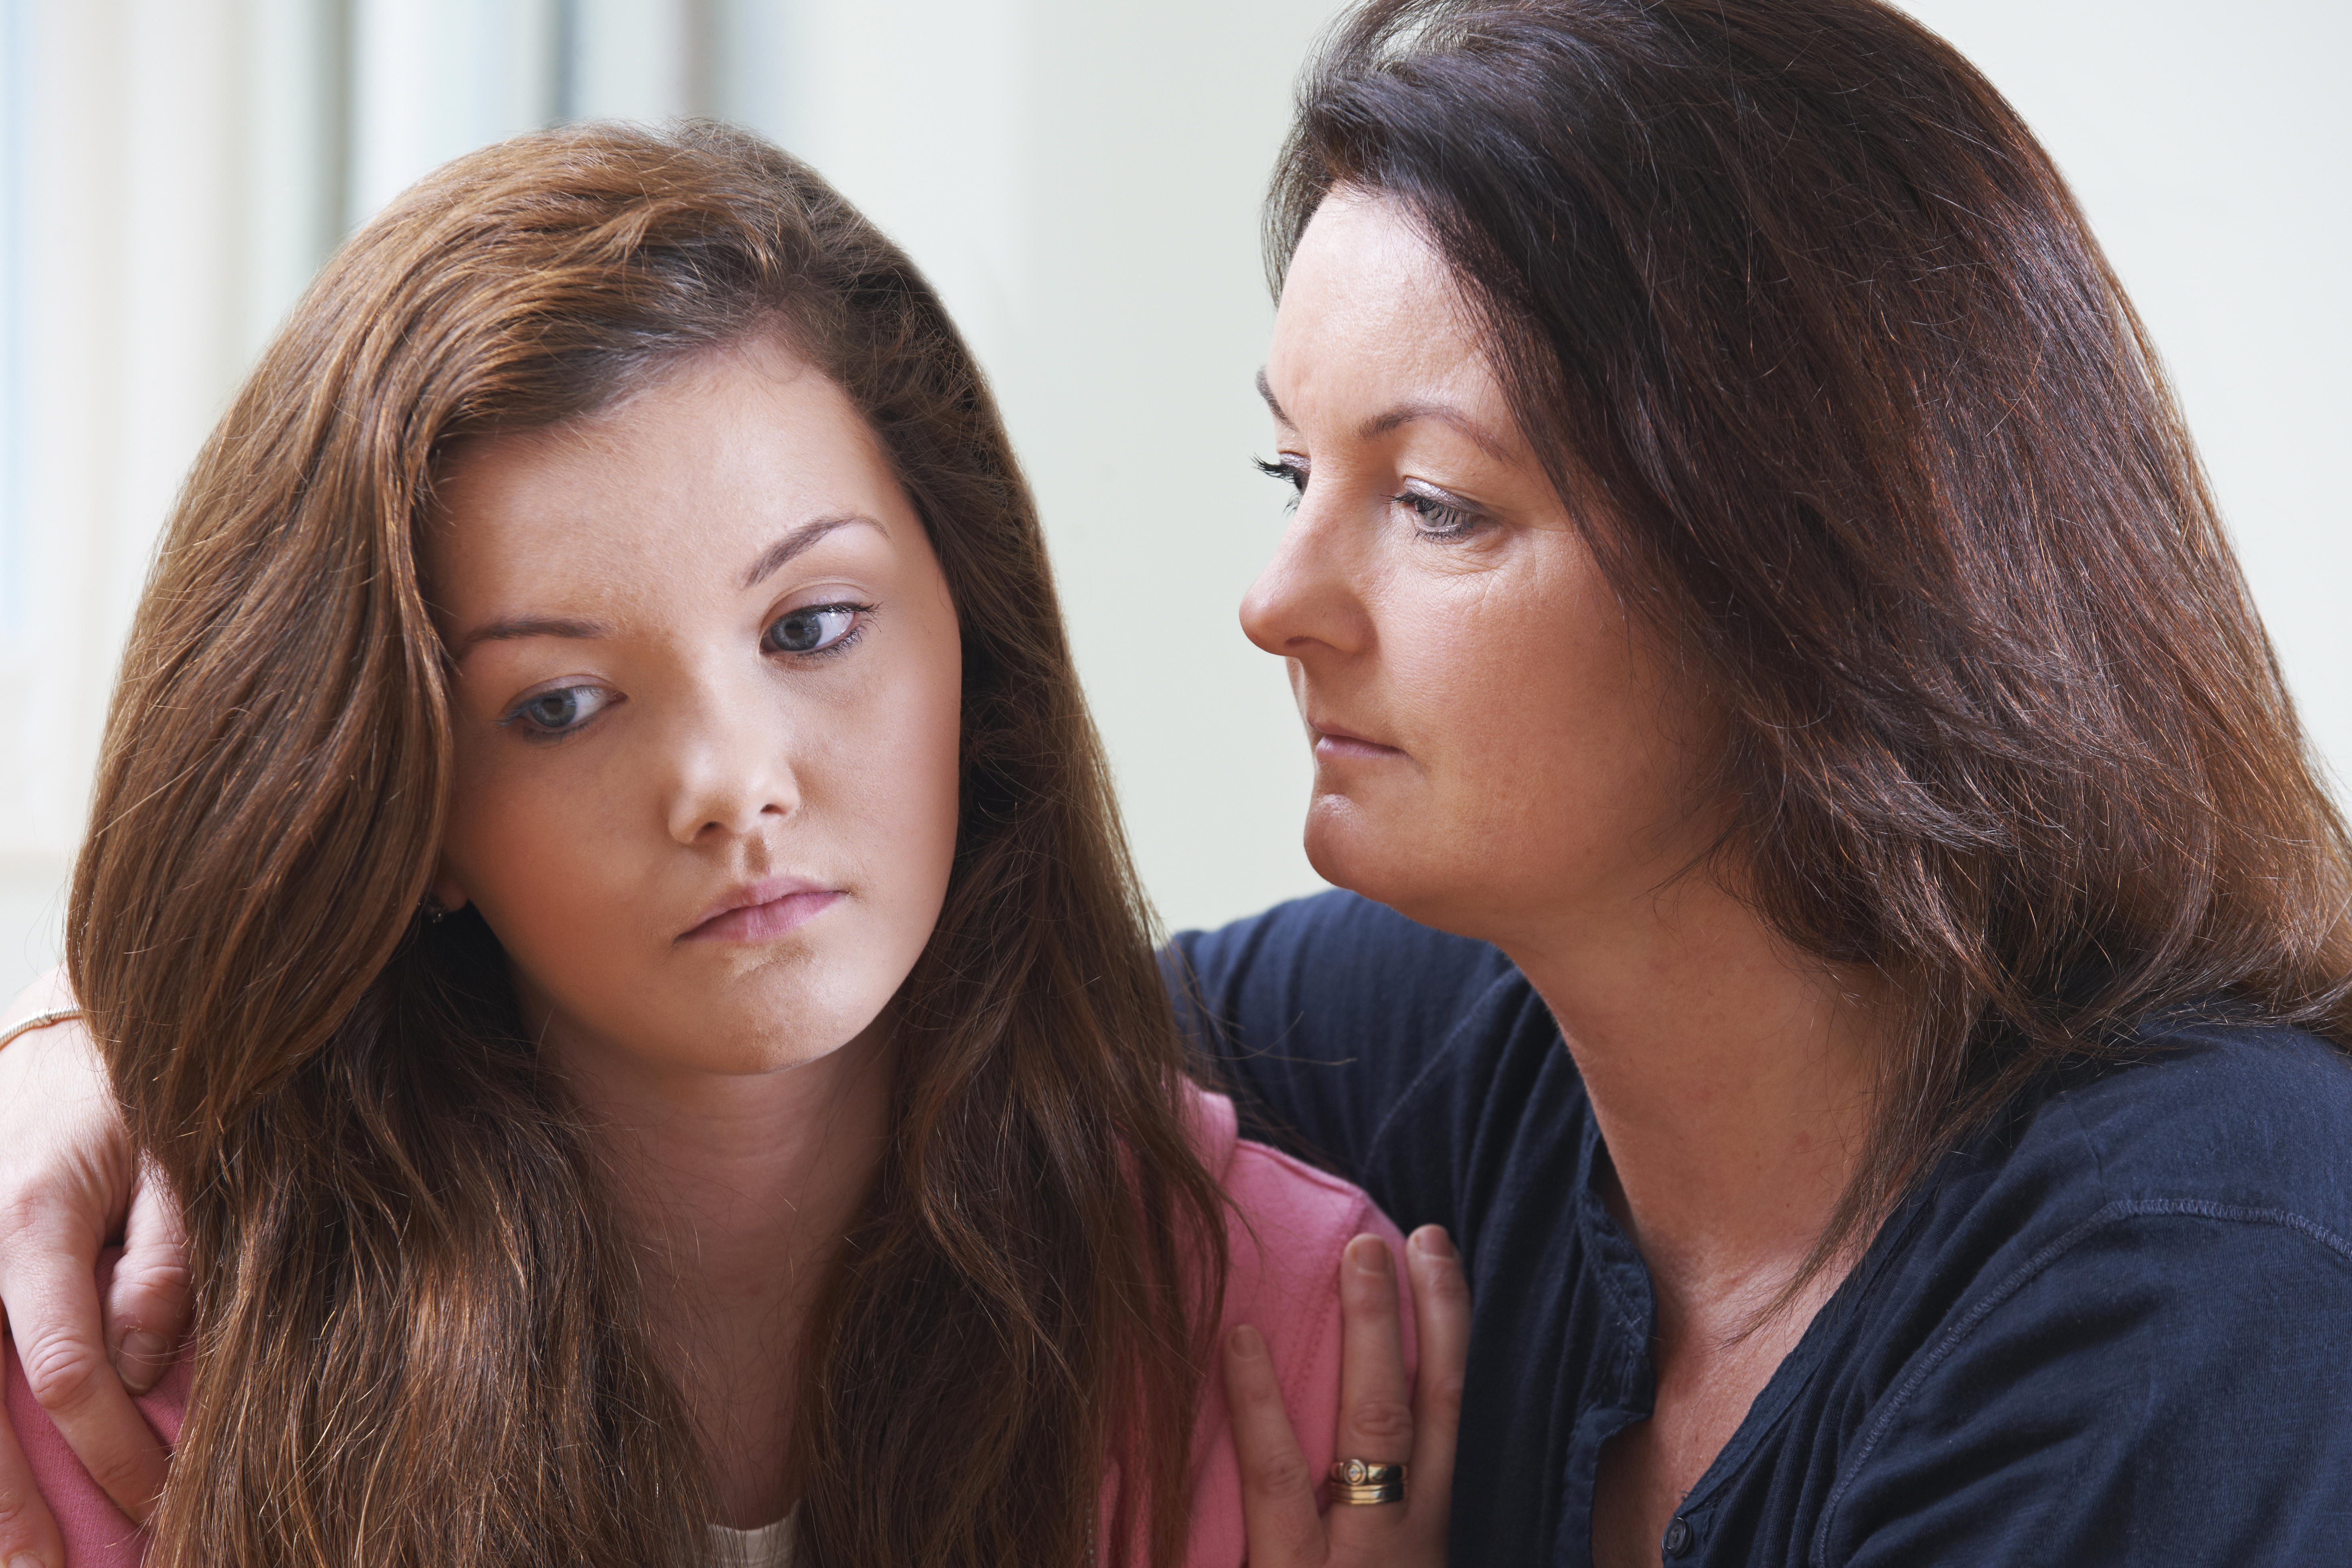 A mother comforting her teenage daughter | Source: Shutterstock